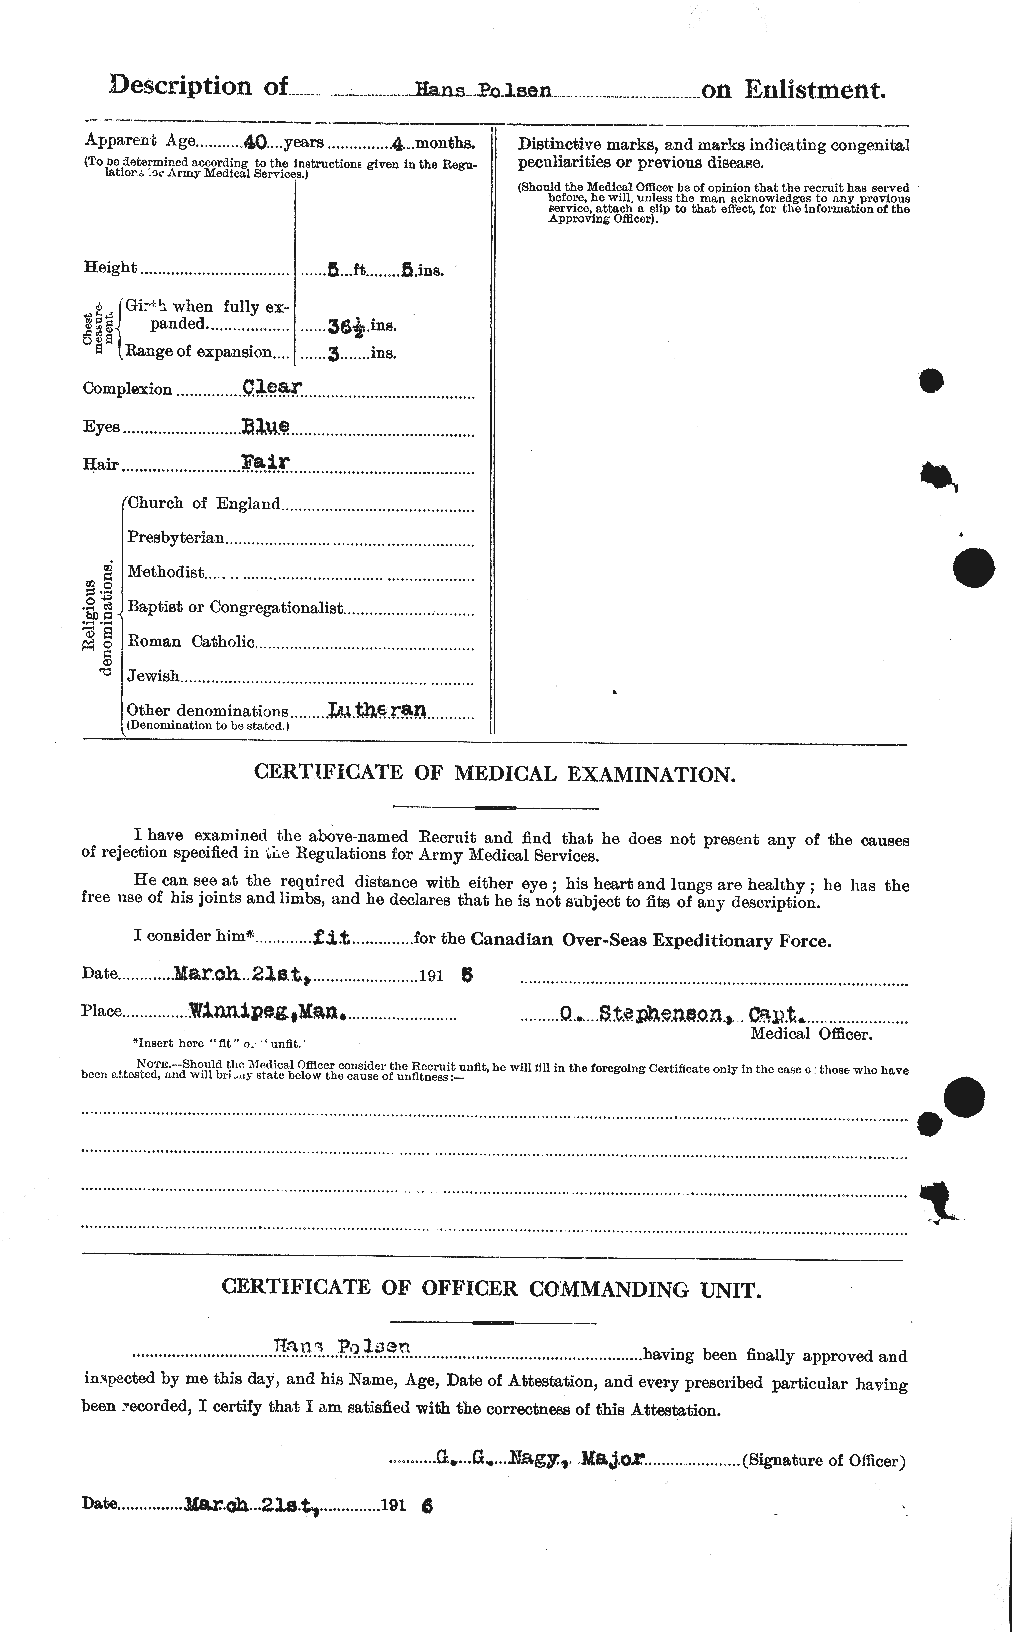 Personnel Records of the First World War - CEF 569522b